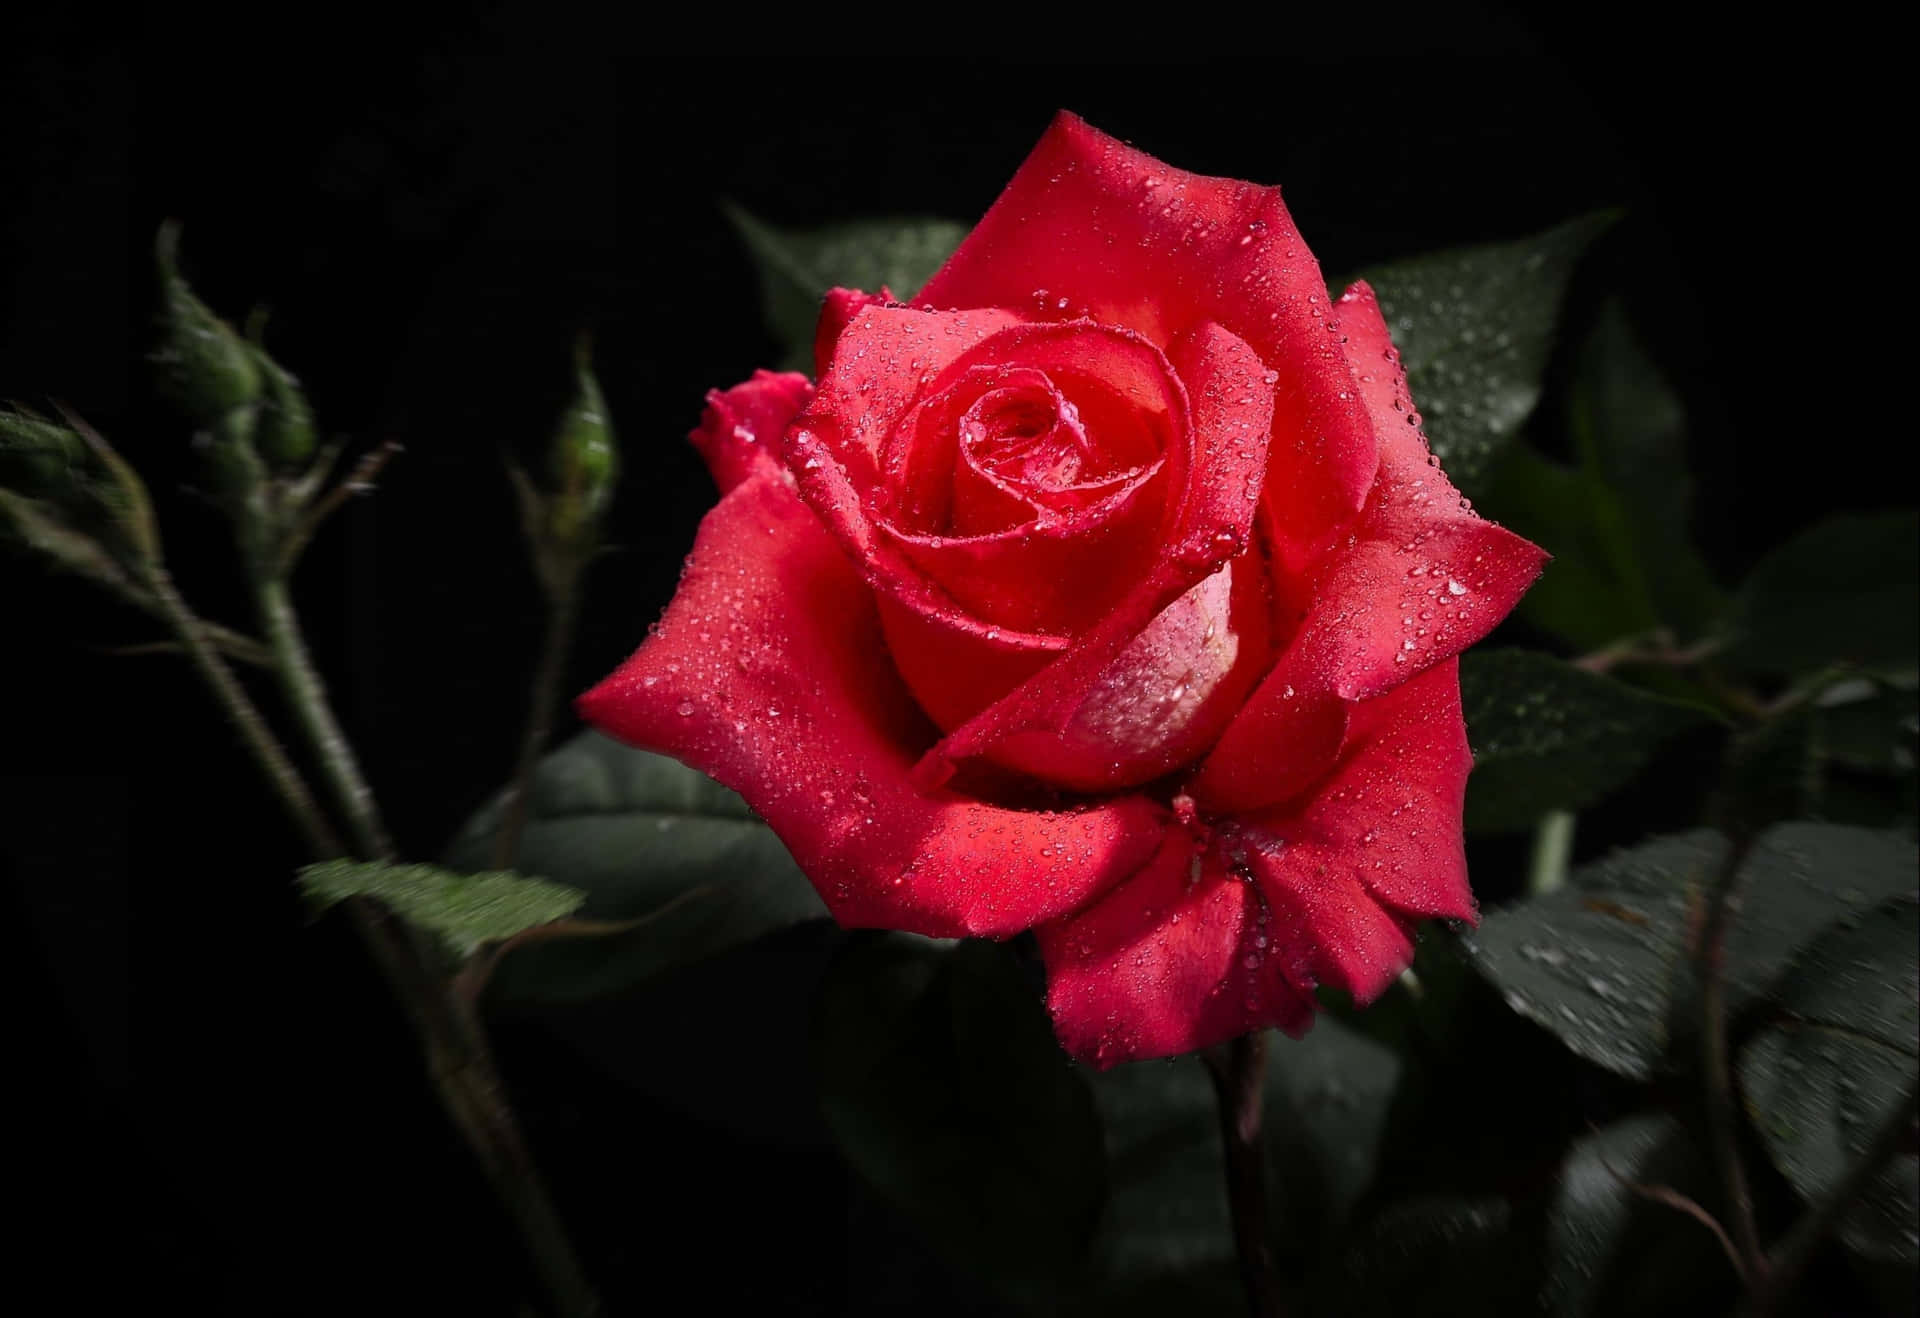 Hd Rose With Dew Drops Background